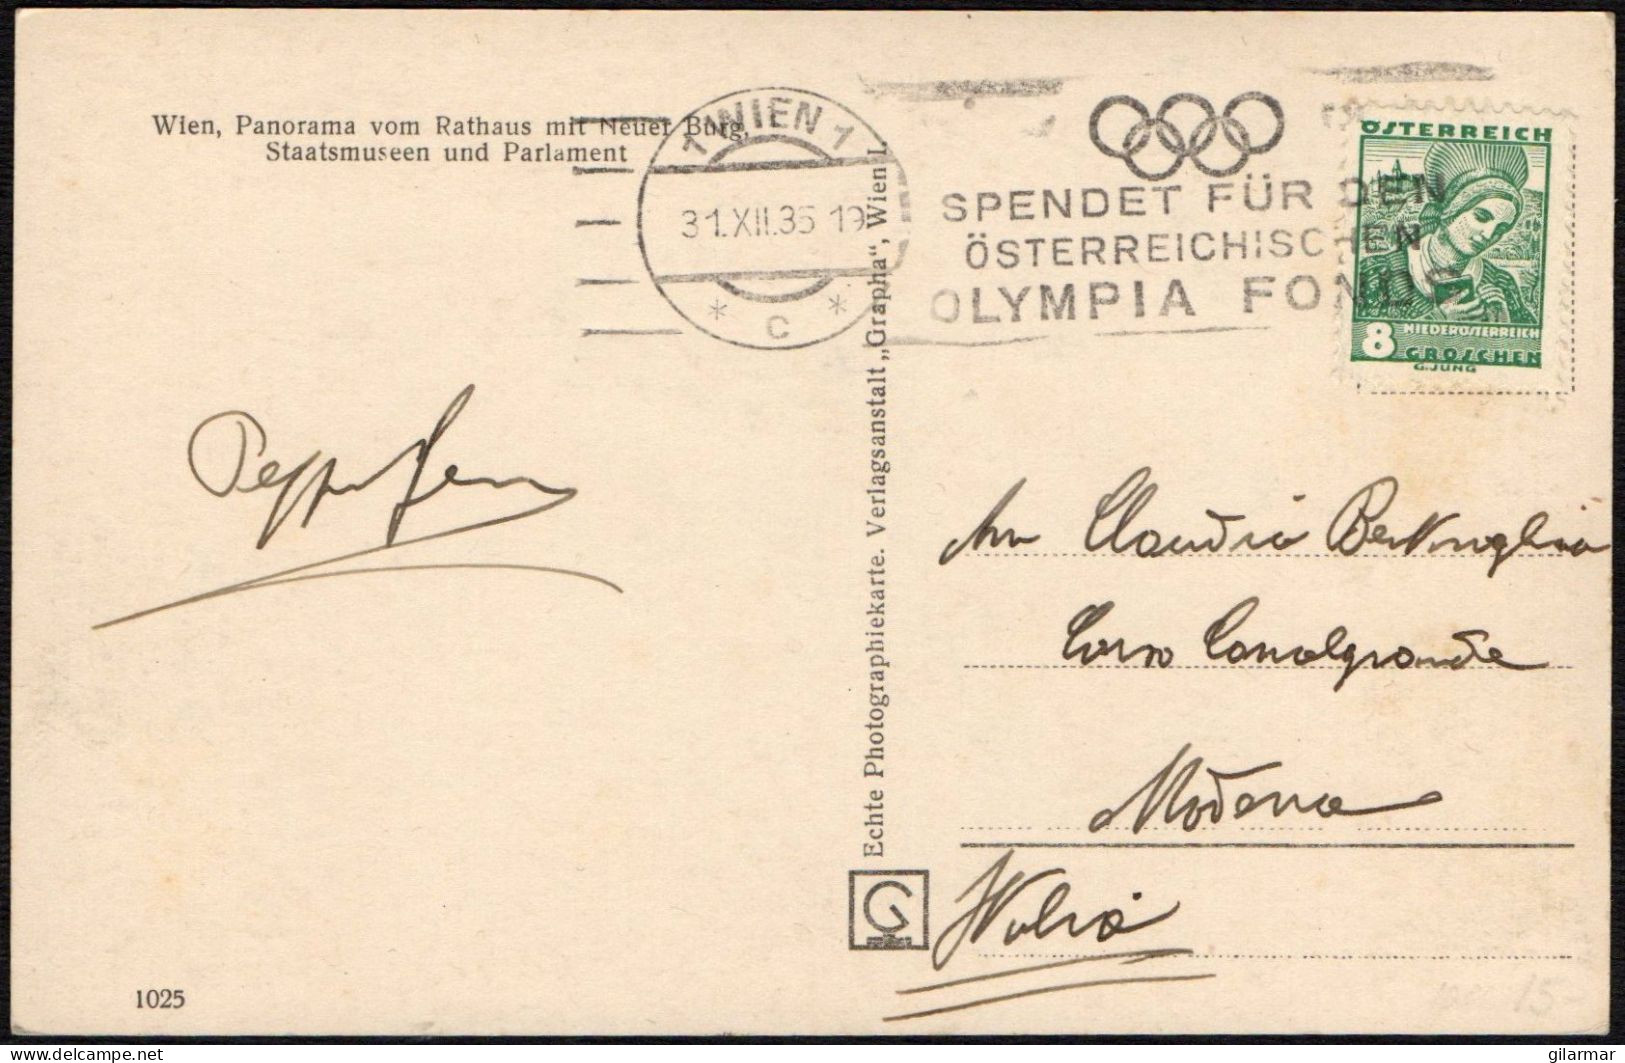 OLYMPIC GAMES 1936 - AUSTRIA WIEN 1 C 1935 - DONATE TO THE AUSTRIAN OLYMPIC FUND - MAILED POSTCARD - M - Ete 1936: Berlin